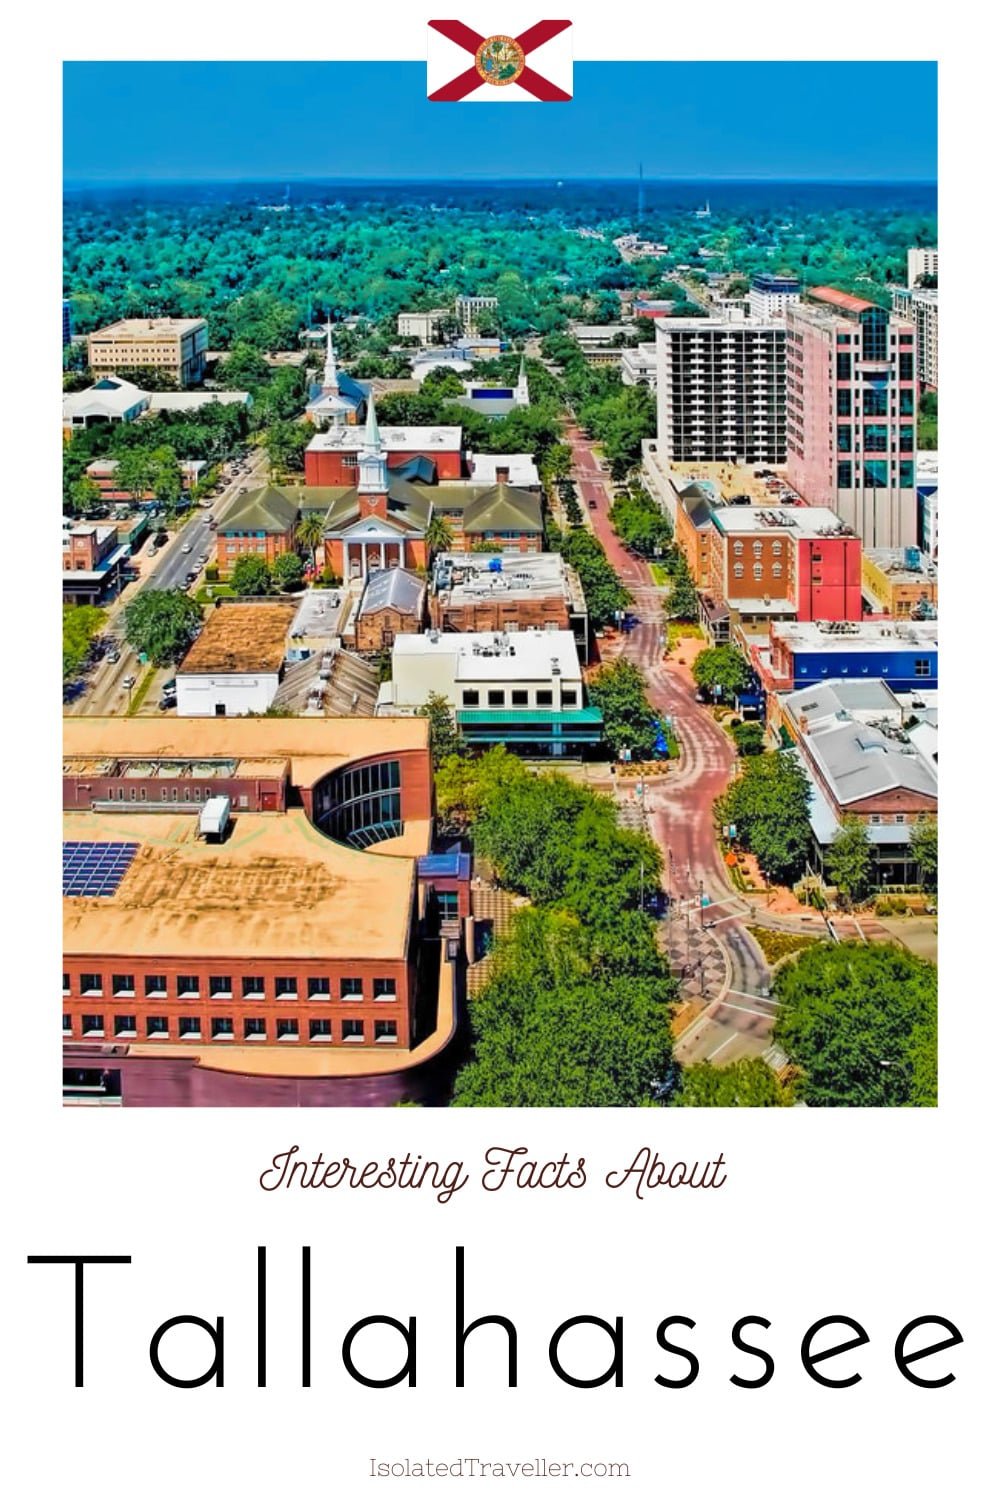 Facts About Tallahassee, fl